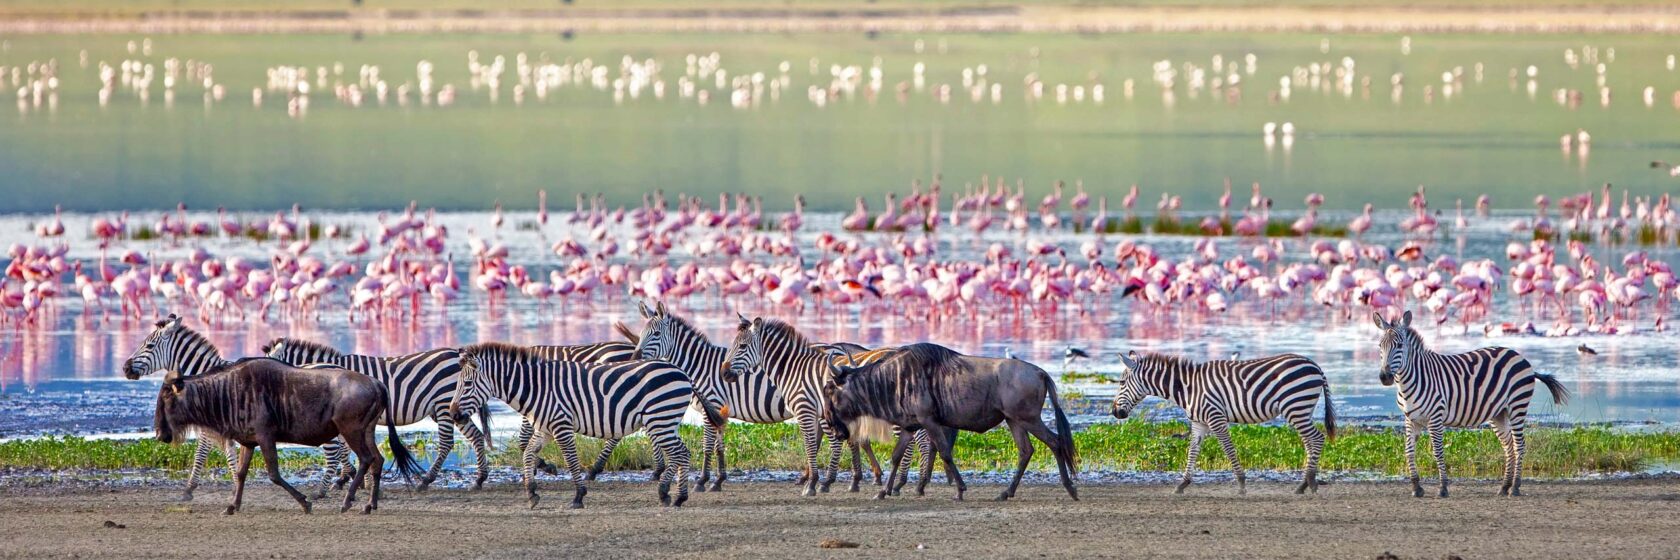 Zebras and wildbeasts with flamingos at a lake.